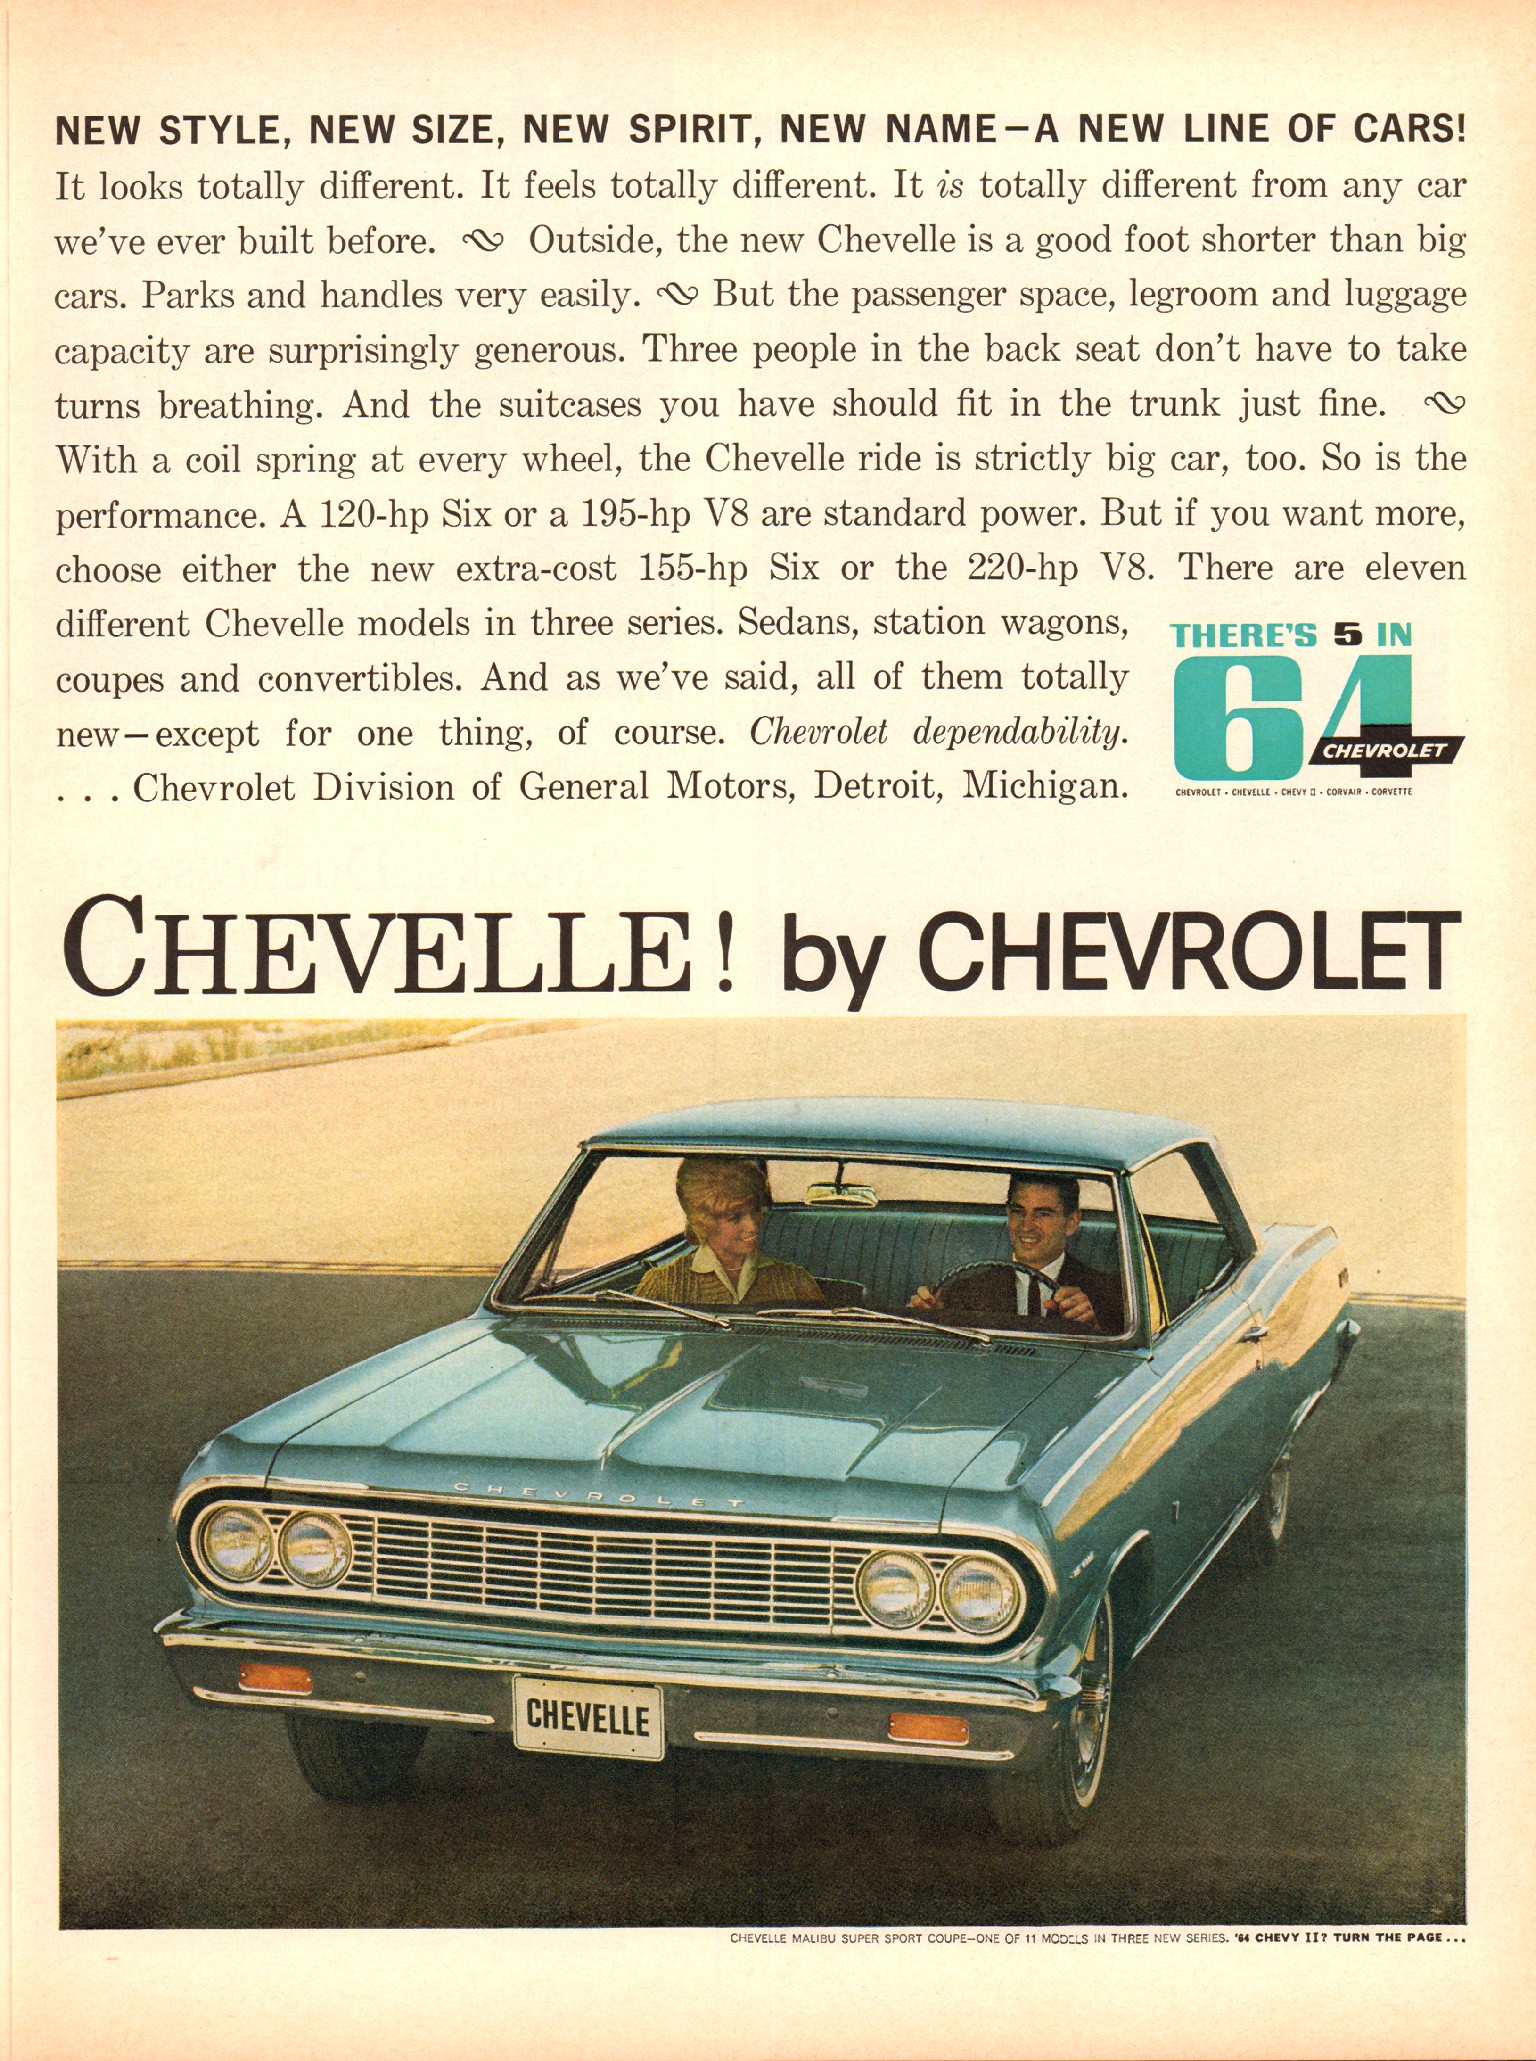 a chevrolet car ad from the early 1960s